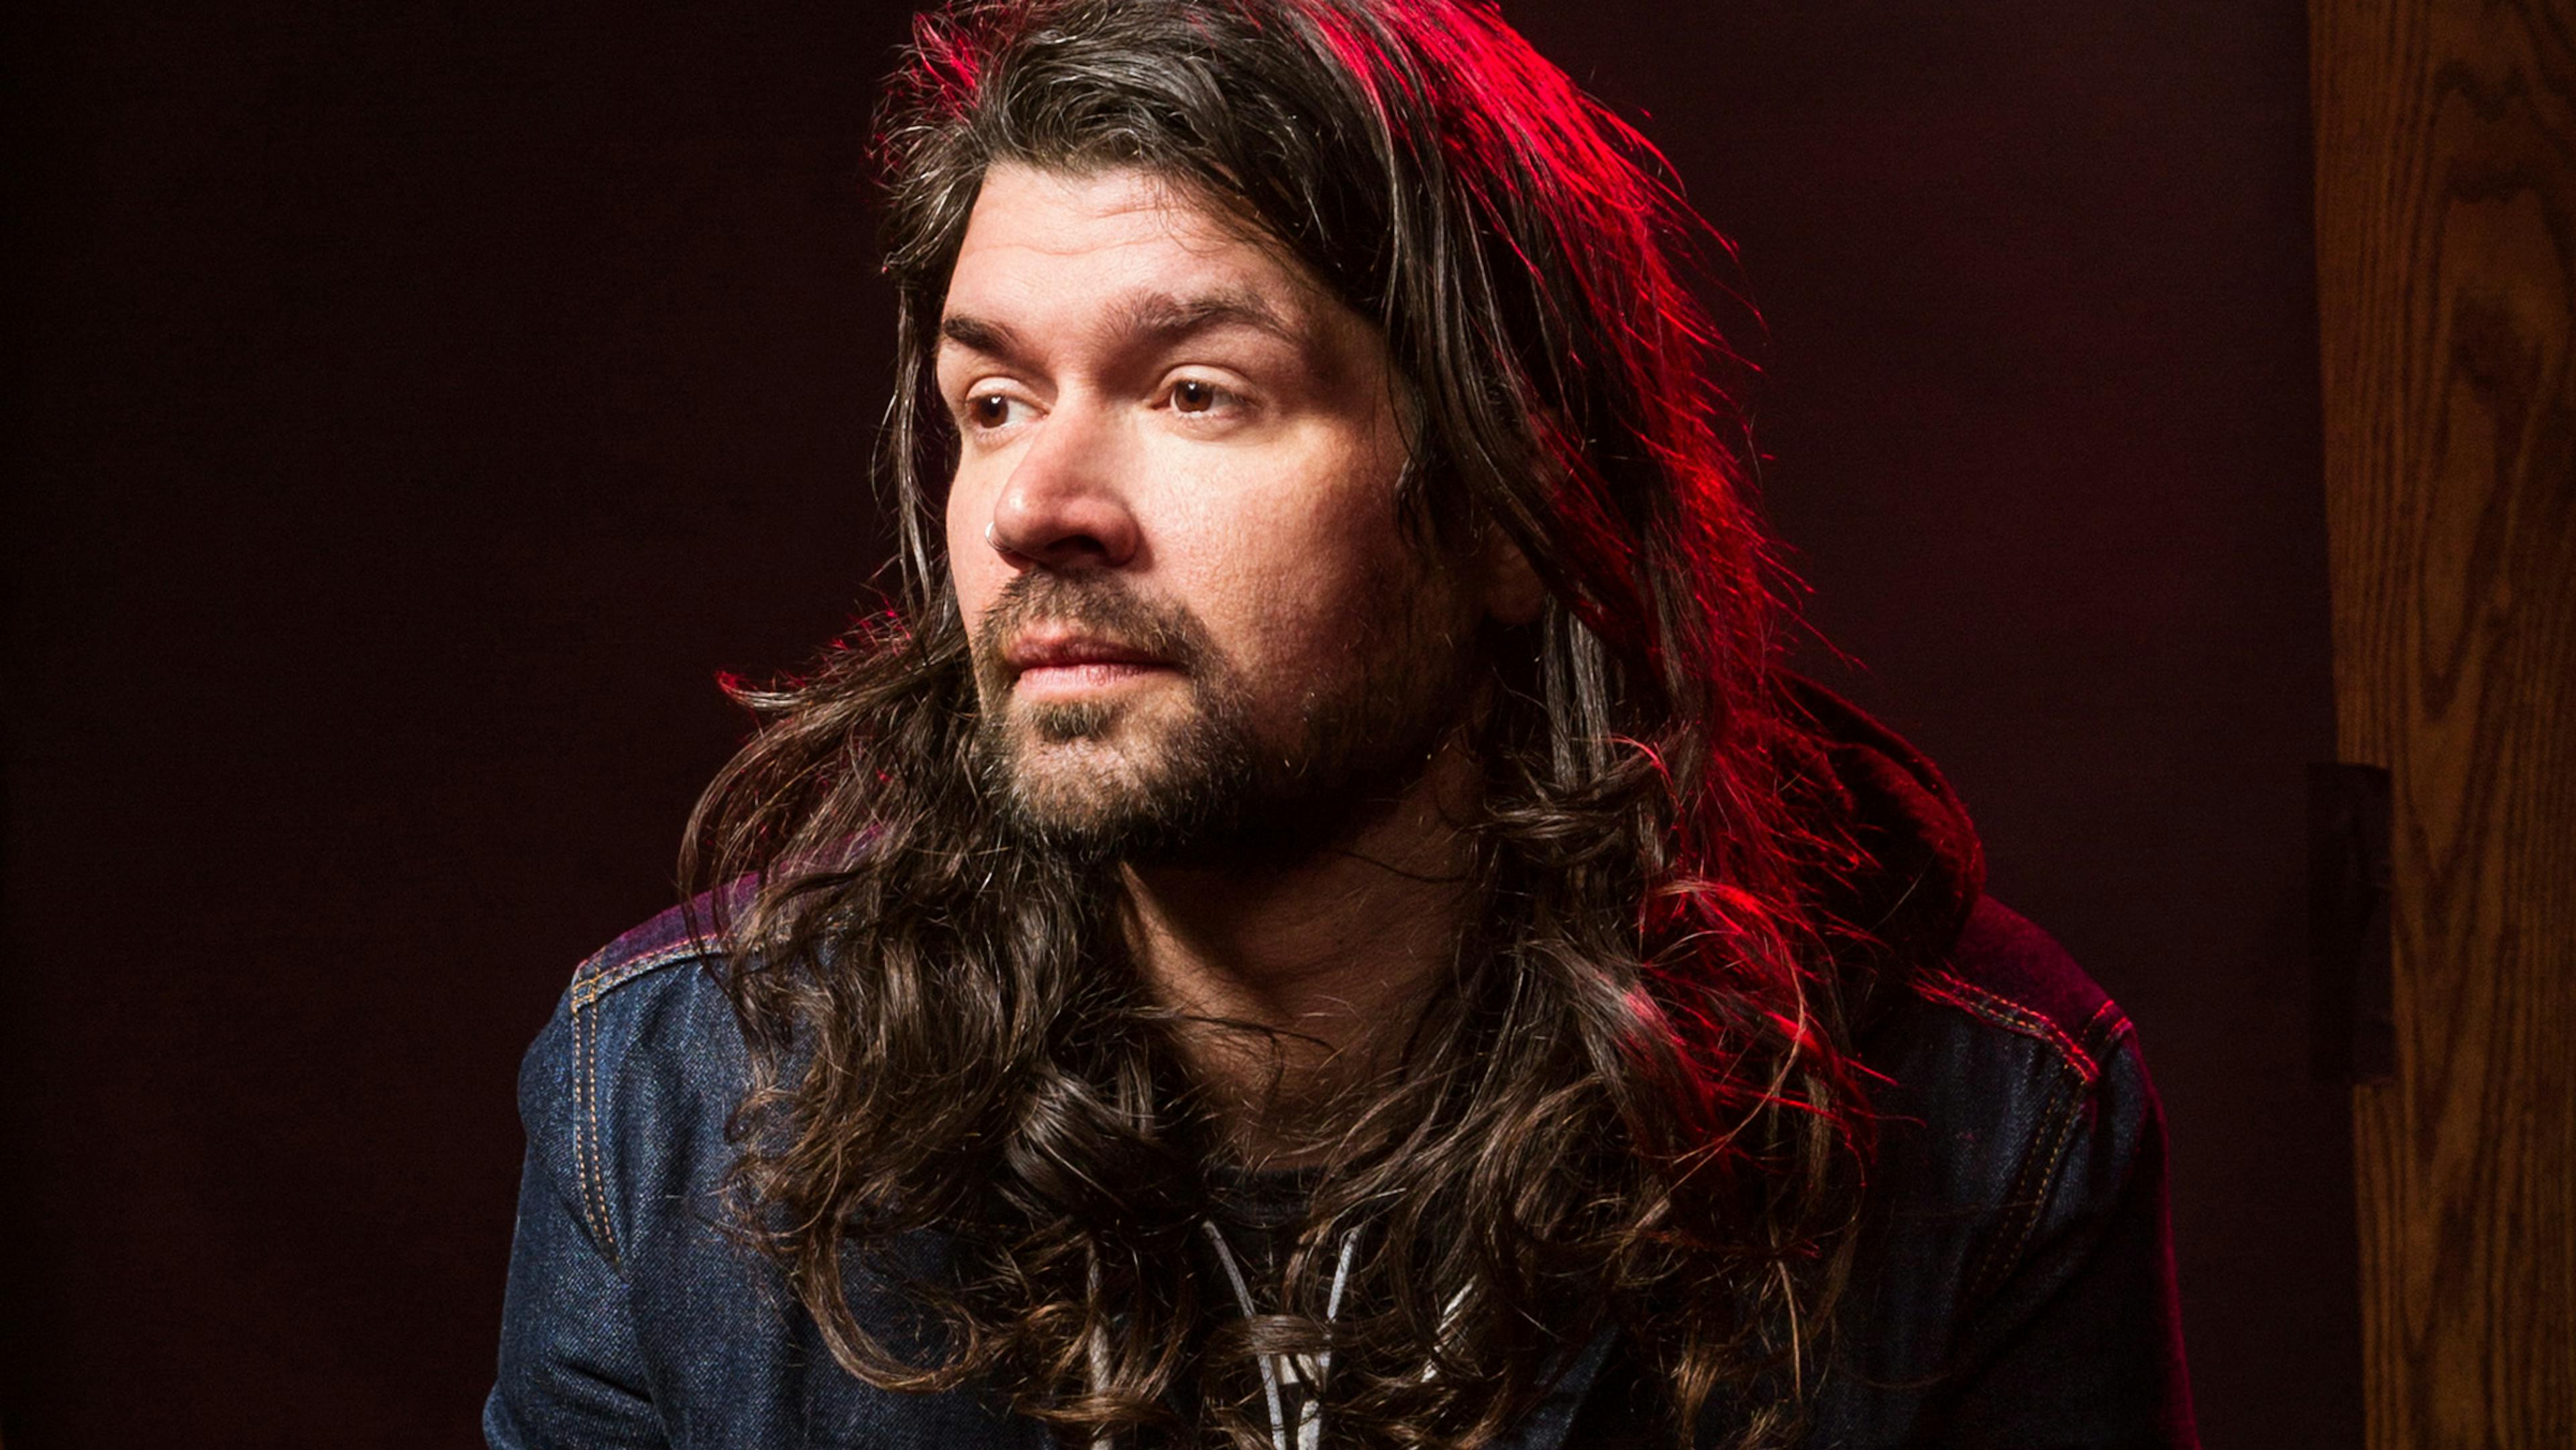 7 things you probably didn’t know about Taking Back Sunday’s Adam Lazzara